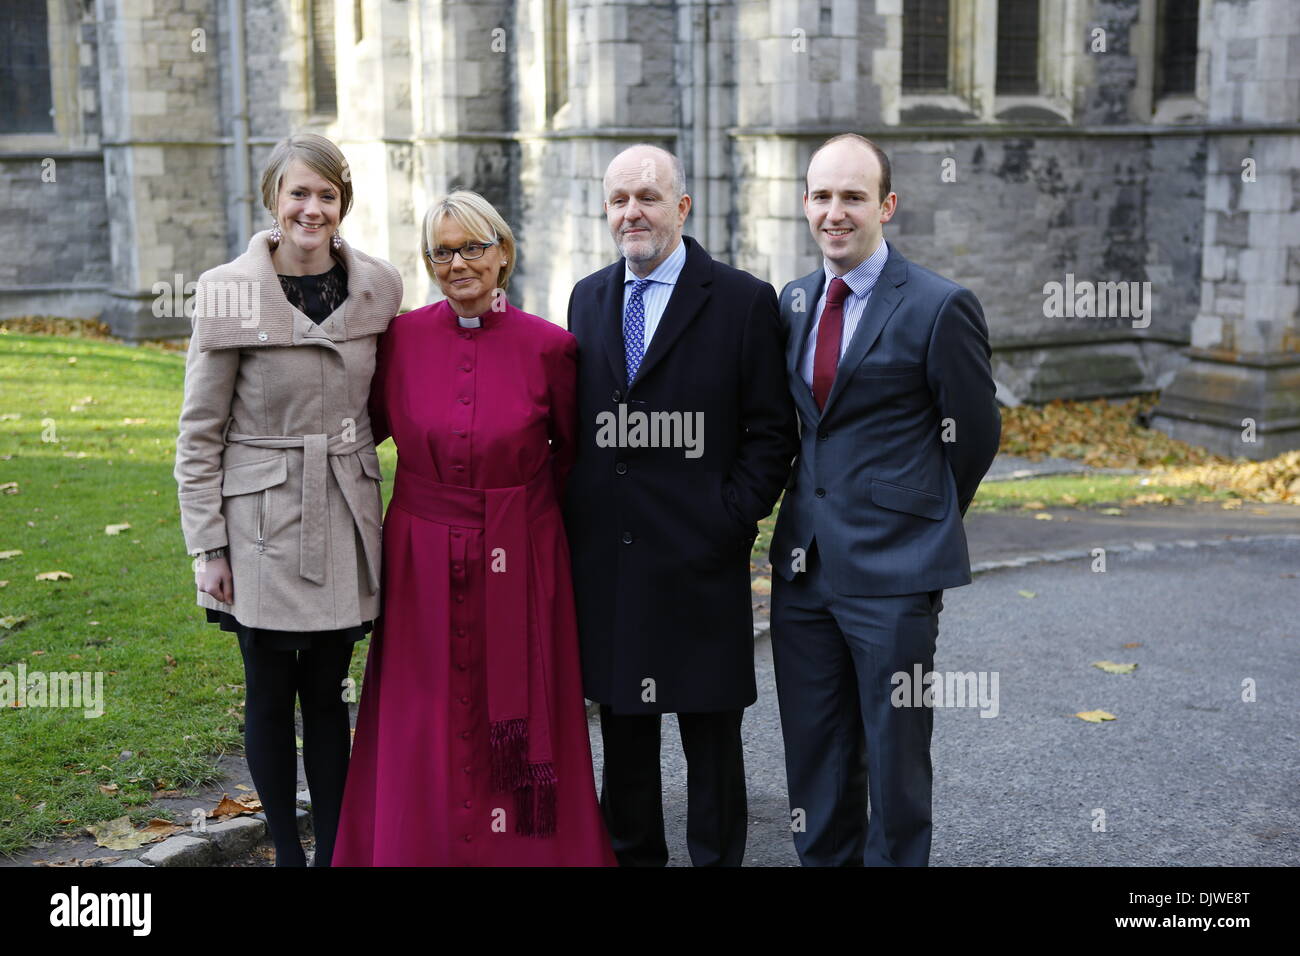 Dublin, Ireland. 30th November 2013. The bishop-elect the Revd Pat Storey (2 L) is pictured with her daughter Carolyn Smith (L), her husband the Revd Earl Storey (2 R)  and her son in law Peter Smith (R) before the service. The Most Revd Pat Storey has been consecrated as Church of Ireland Bishop of Meath and Kildare in Dublin's Christ Church Cathedral. Credit:  Michael Debets/Alamy Live News Stock Photo